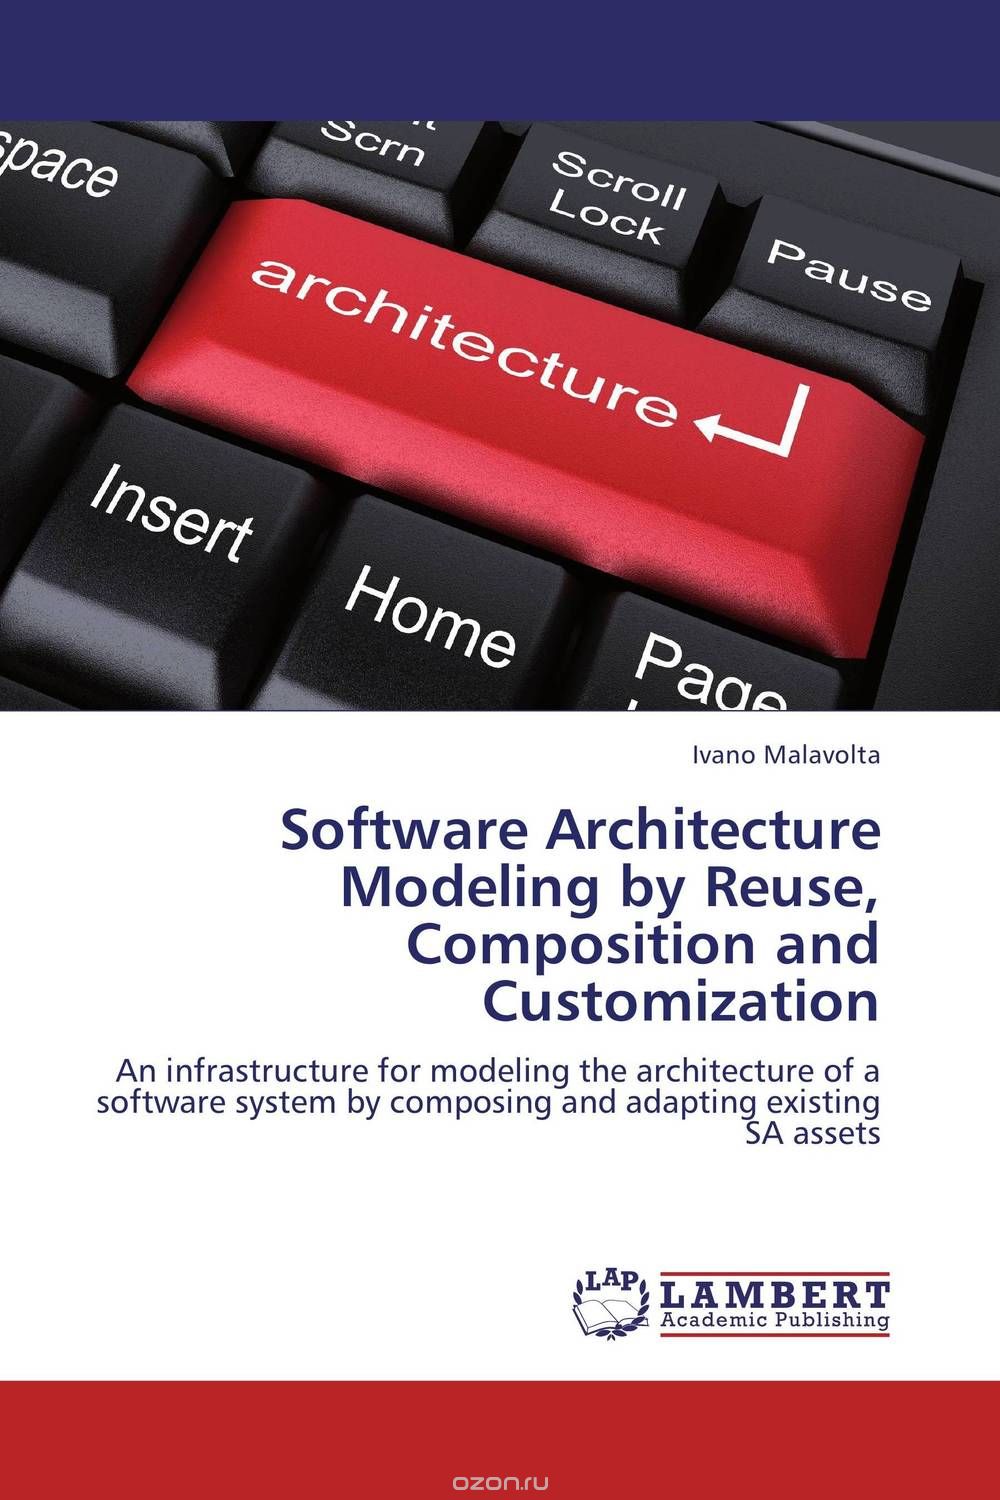 Скачать книгу "Software Architecture Modeling by Reuse, Composition and Customization"